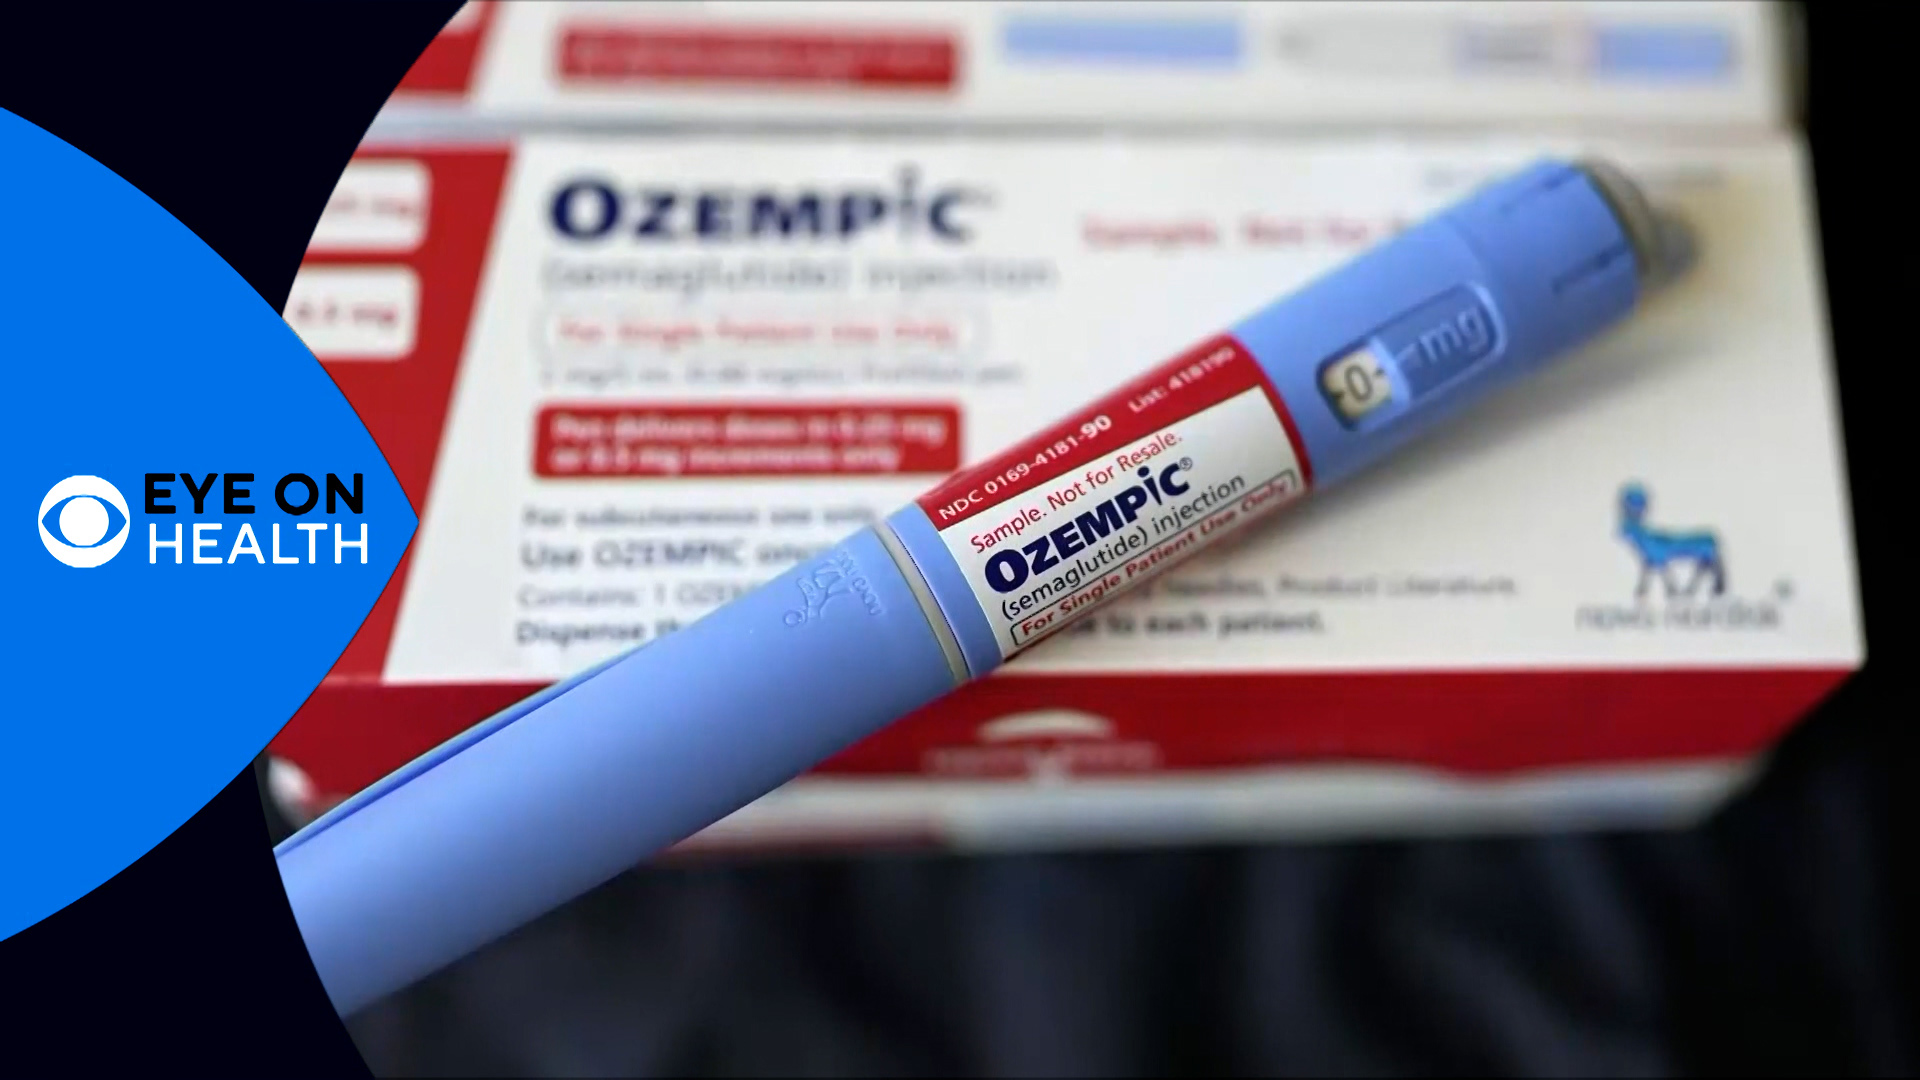 Eye on Health takes a look at the health stories that make news during the week. This week we look at Ozempic alternatives, fighting PFAS, and more.